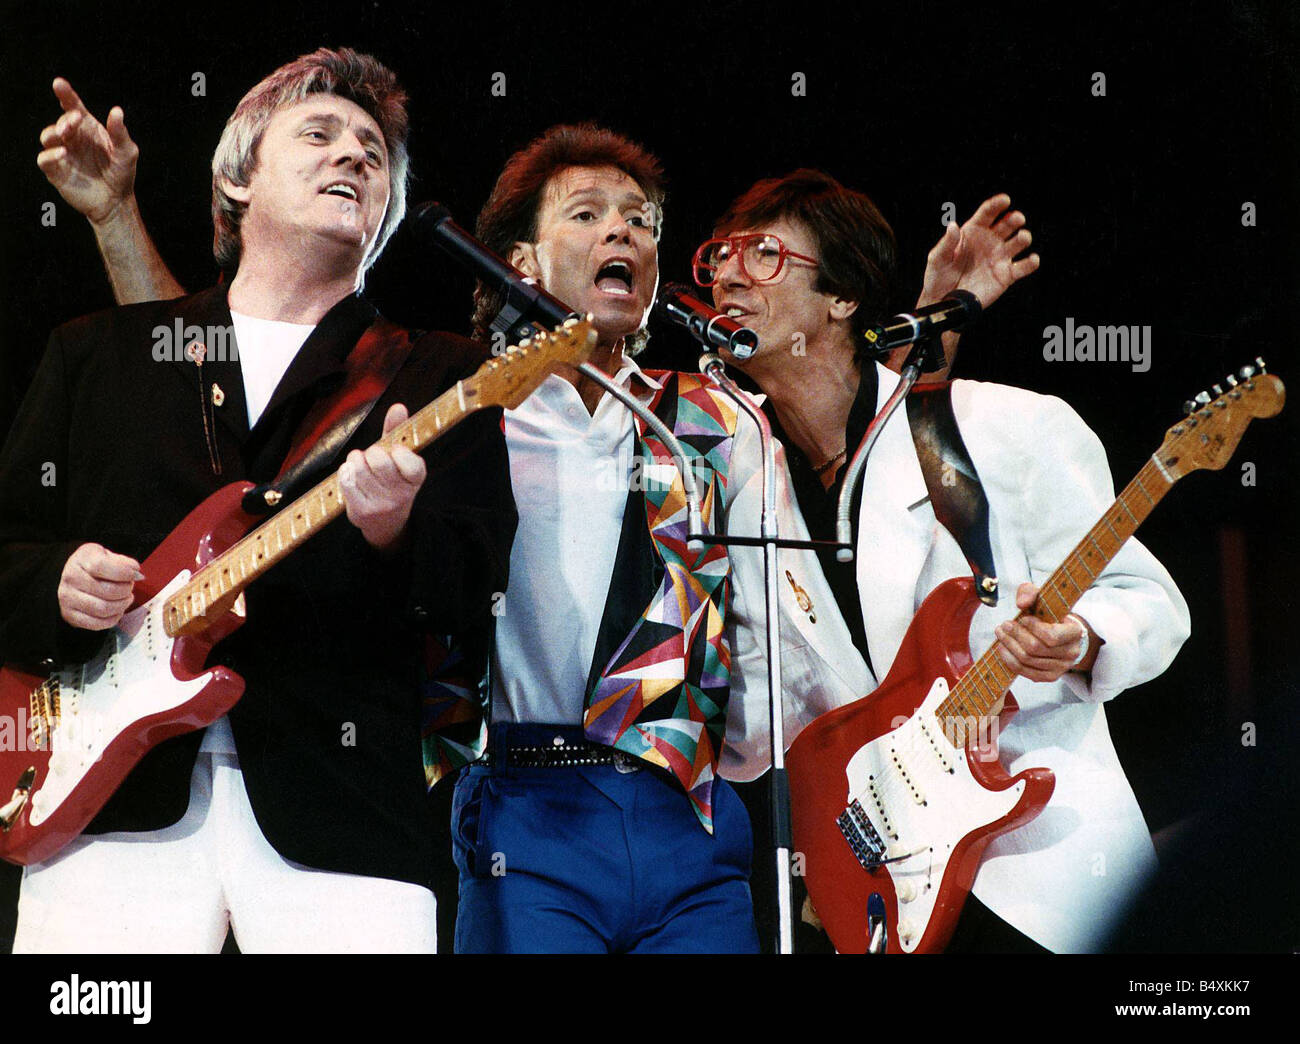 Cliff Richard Singer reunites with Bruce Welch and Hank Marvin members of his old backing group The Shadows on stage at Webley Stadium for his anniversary concert Music Stock Photo